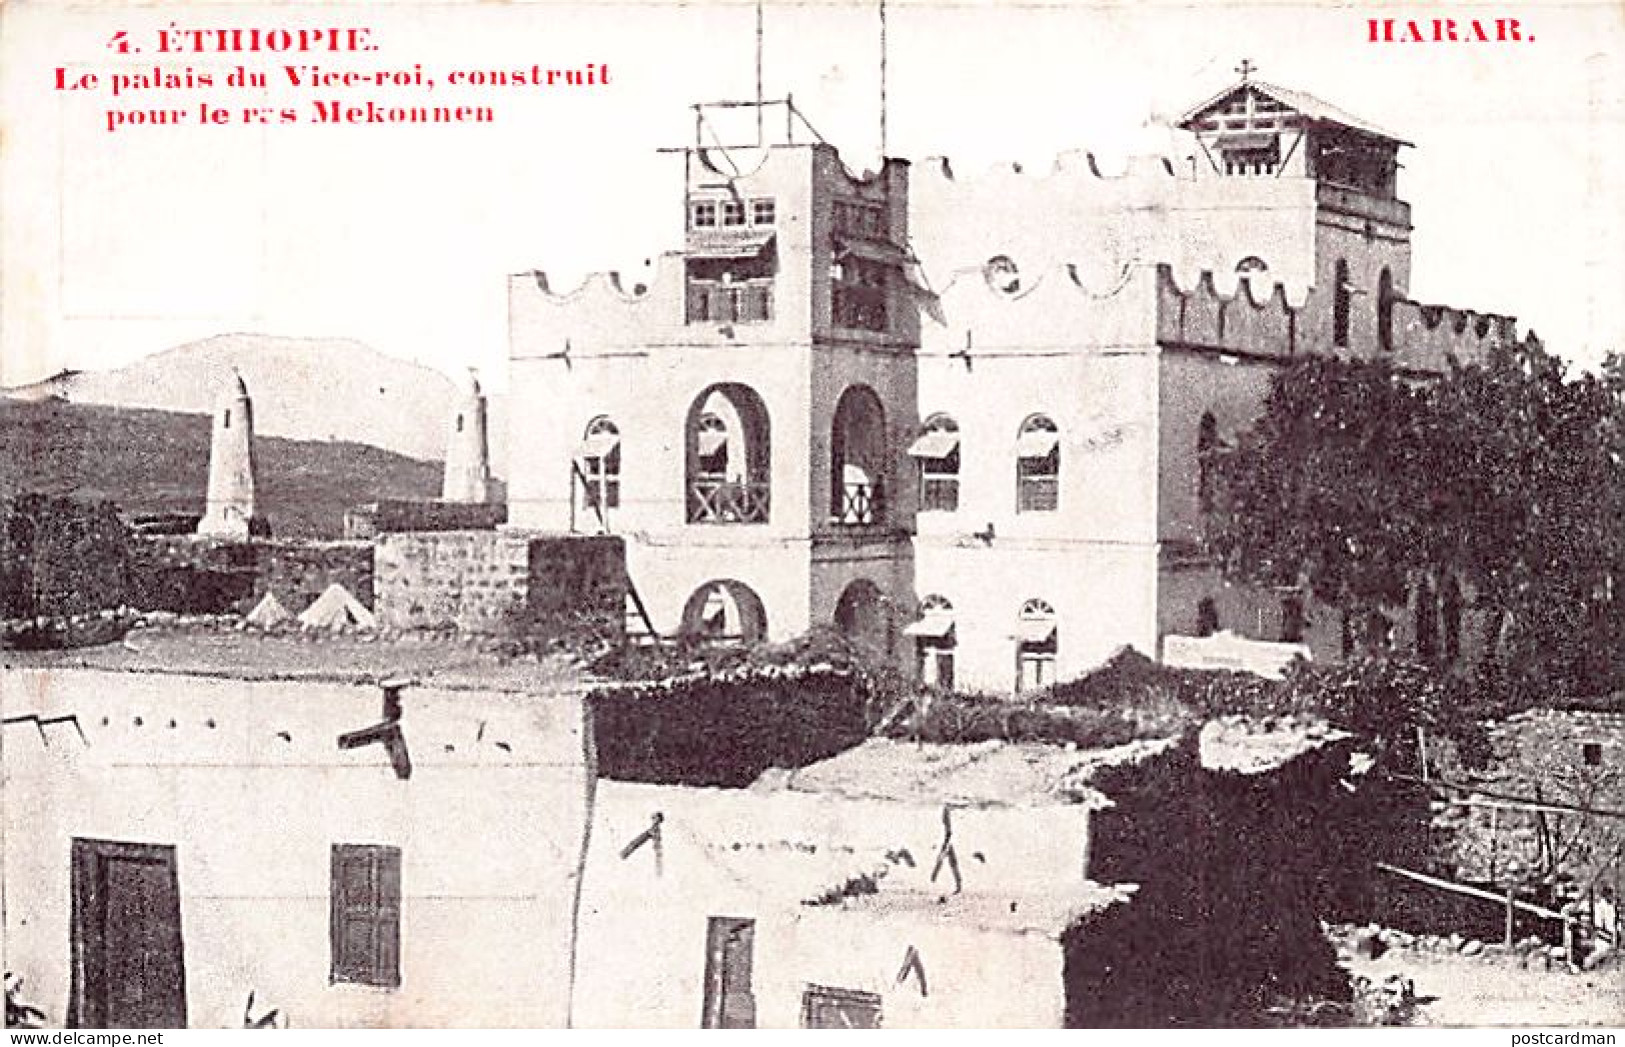 Ethiopia - HARAR - The Viceroy's Palace - Publ. St. Lazarus Printing House, Dire - Äthiopien